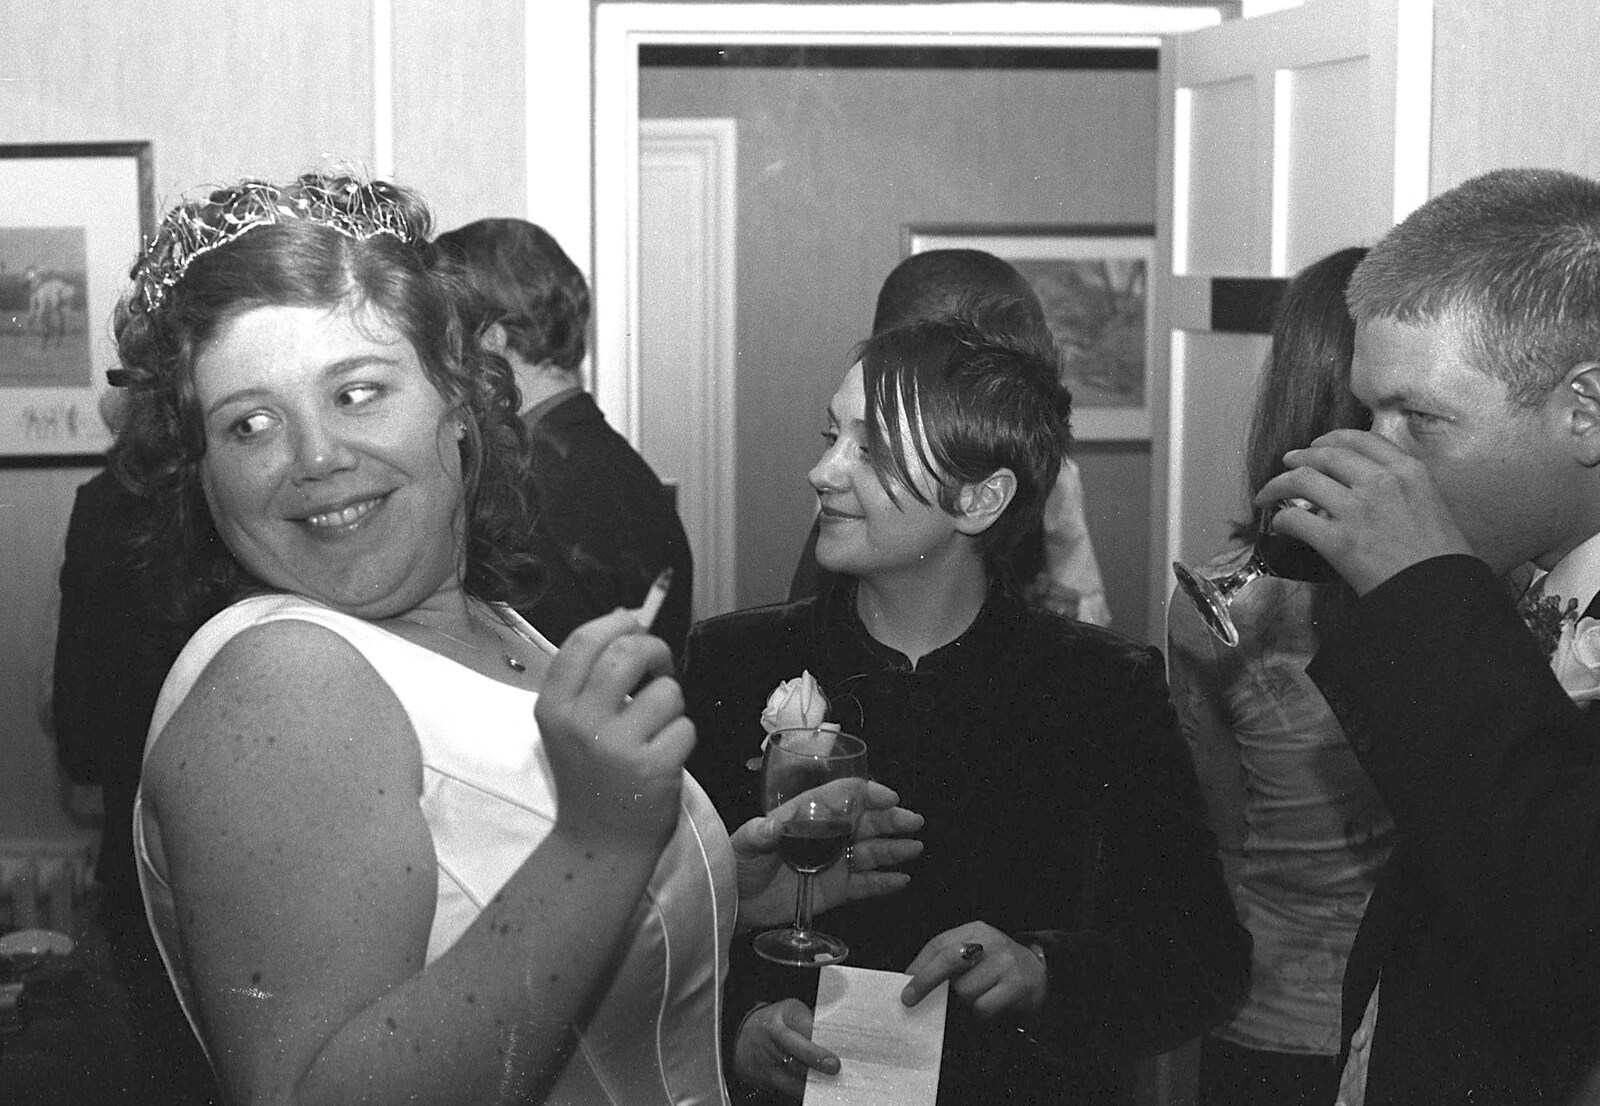 Sis has a quick ciggie from Sis's Nearly-Christmas Wedding, Meavy, Dartmoor - 20th December 2003